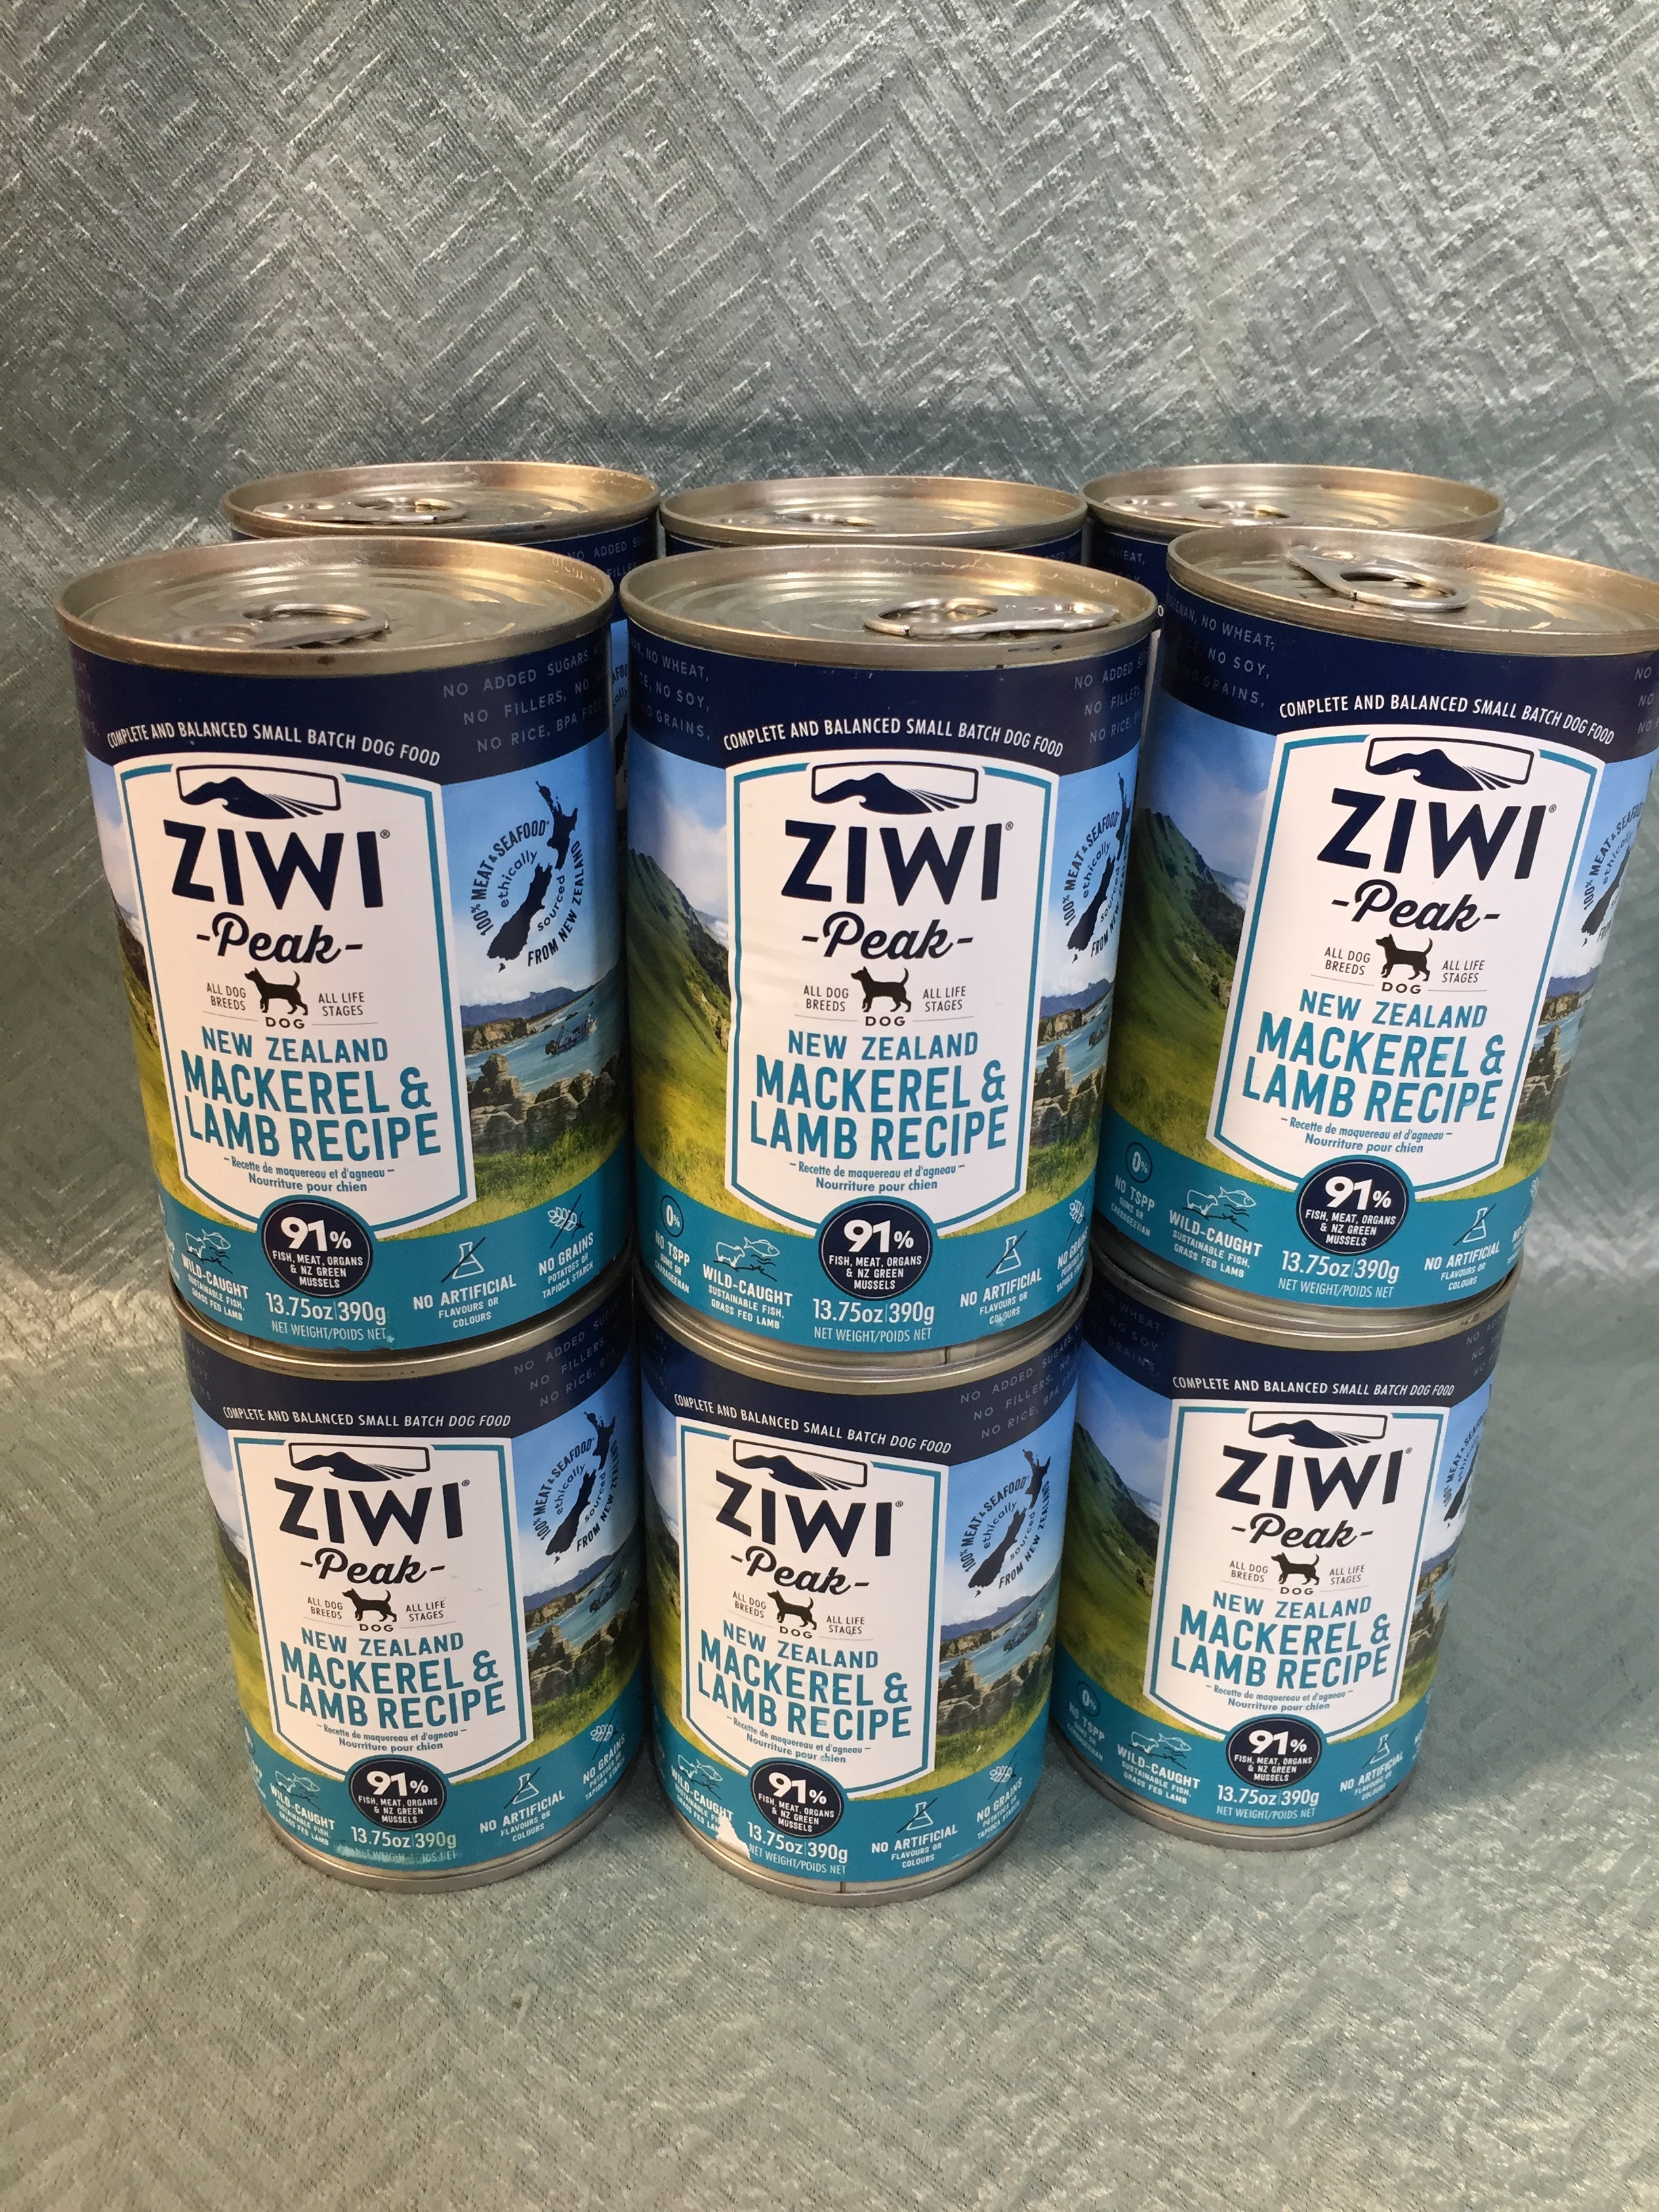 ZIWI Peak Canned Wet Dog Food – Mackerel & Lamb - 12 Pack of Cans (7555196682478)